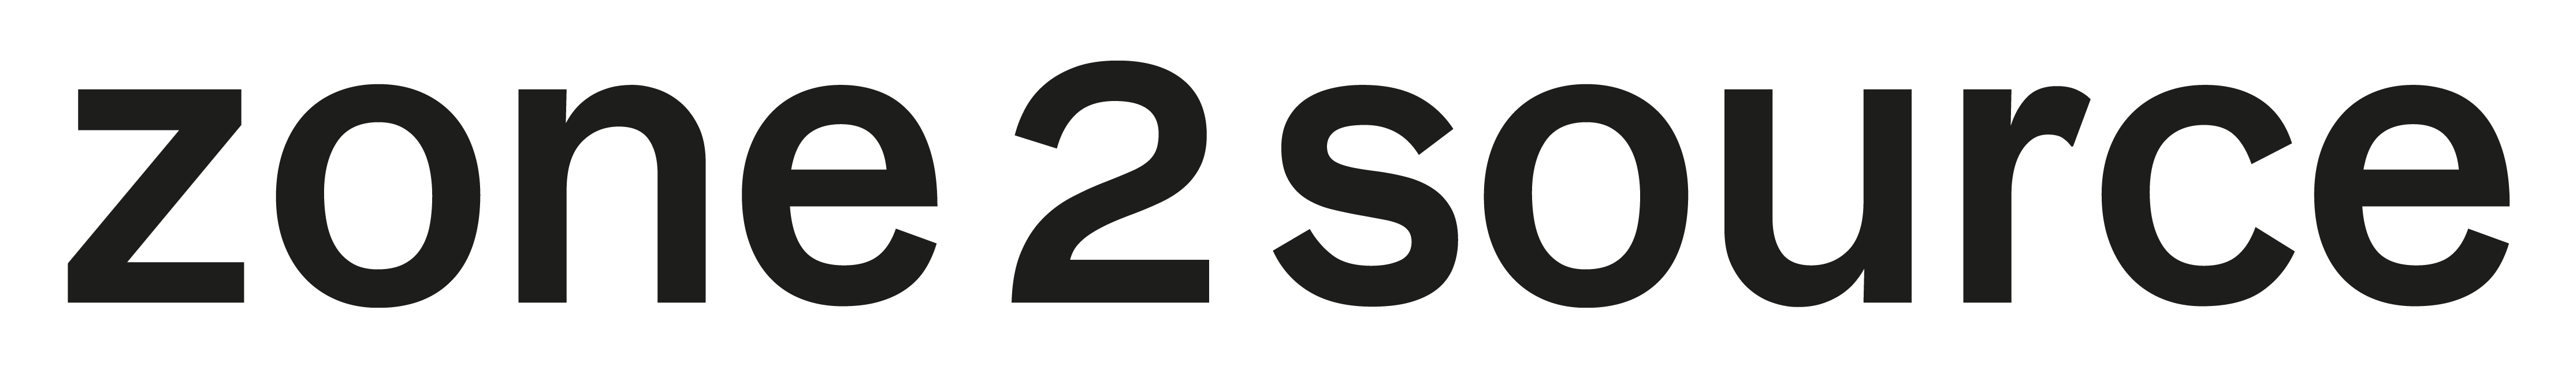 logo Zone2Source-2.png